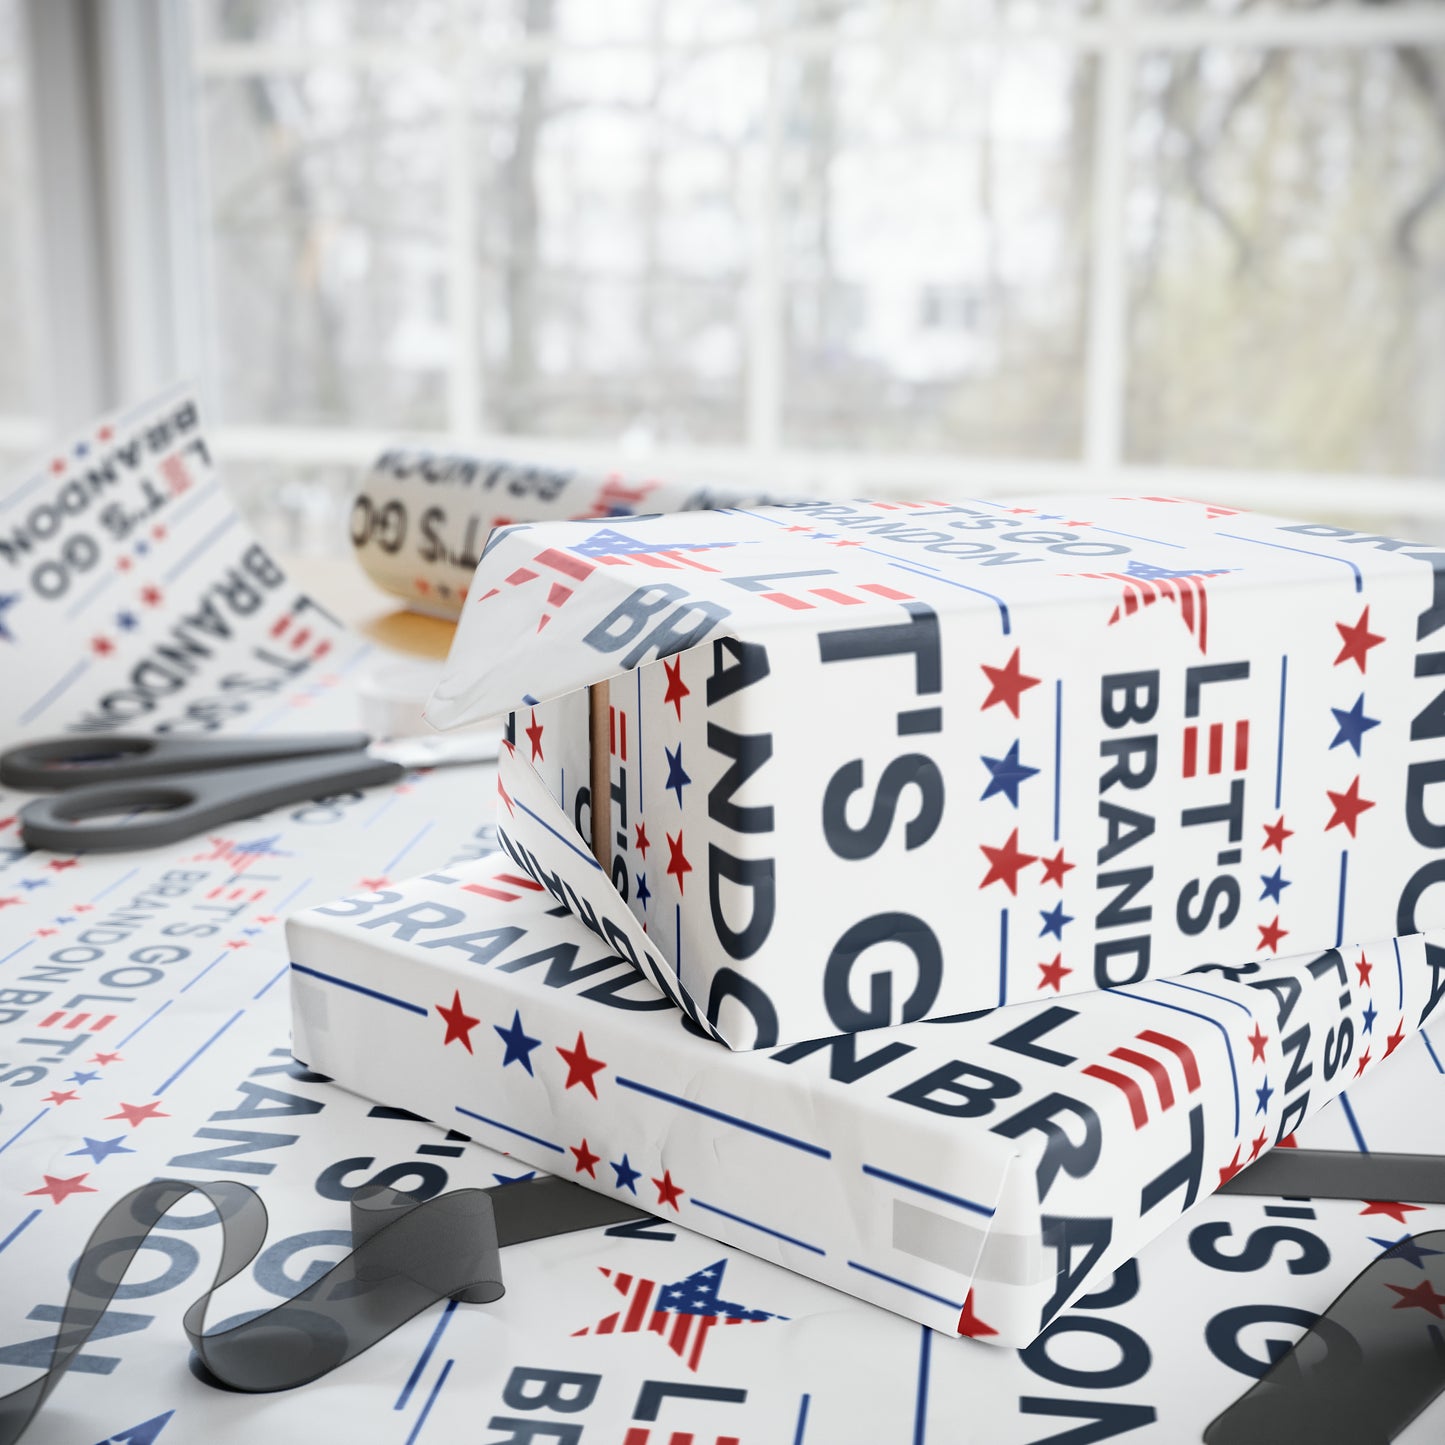 Let's Go Brandon Style USA Wrapping Paper for Gifts - Trump Maga Let's Go Brandon Trump Christmas Gift Wrap